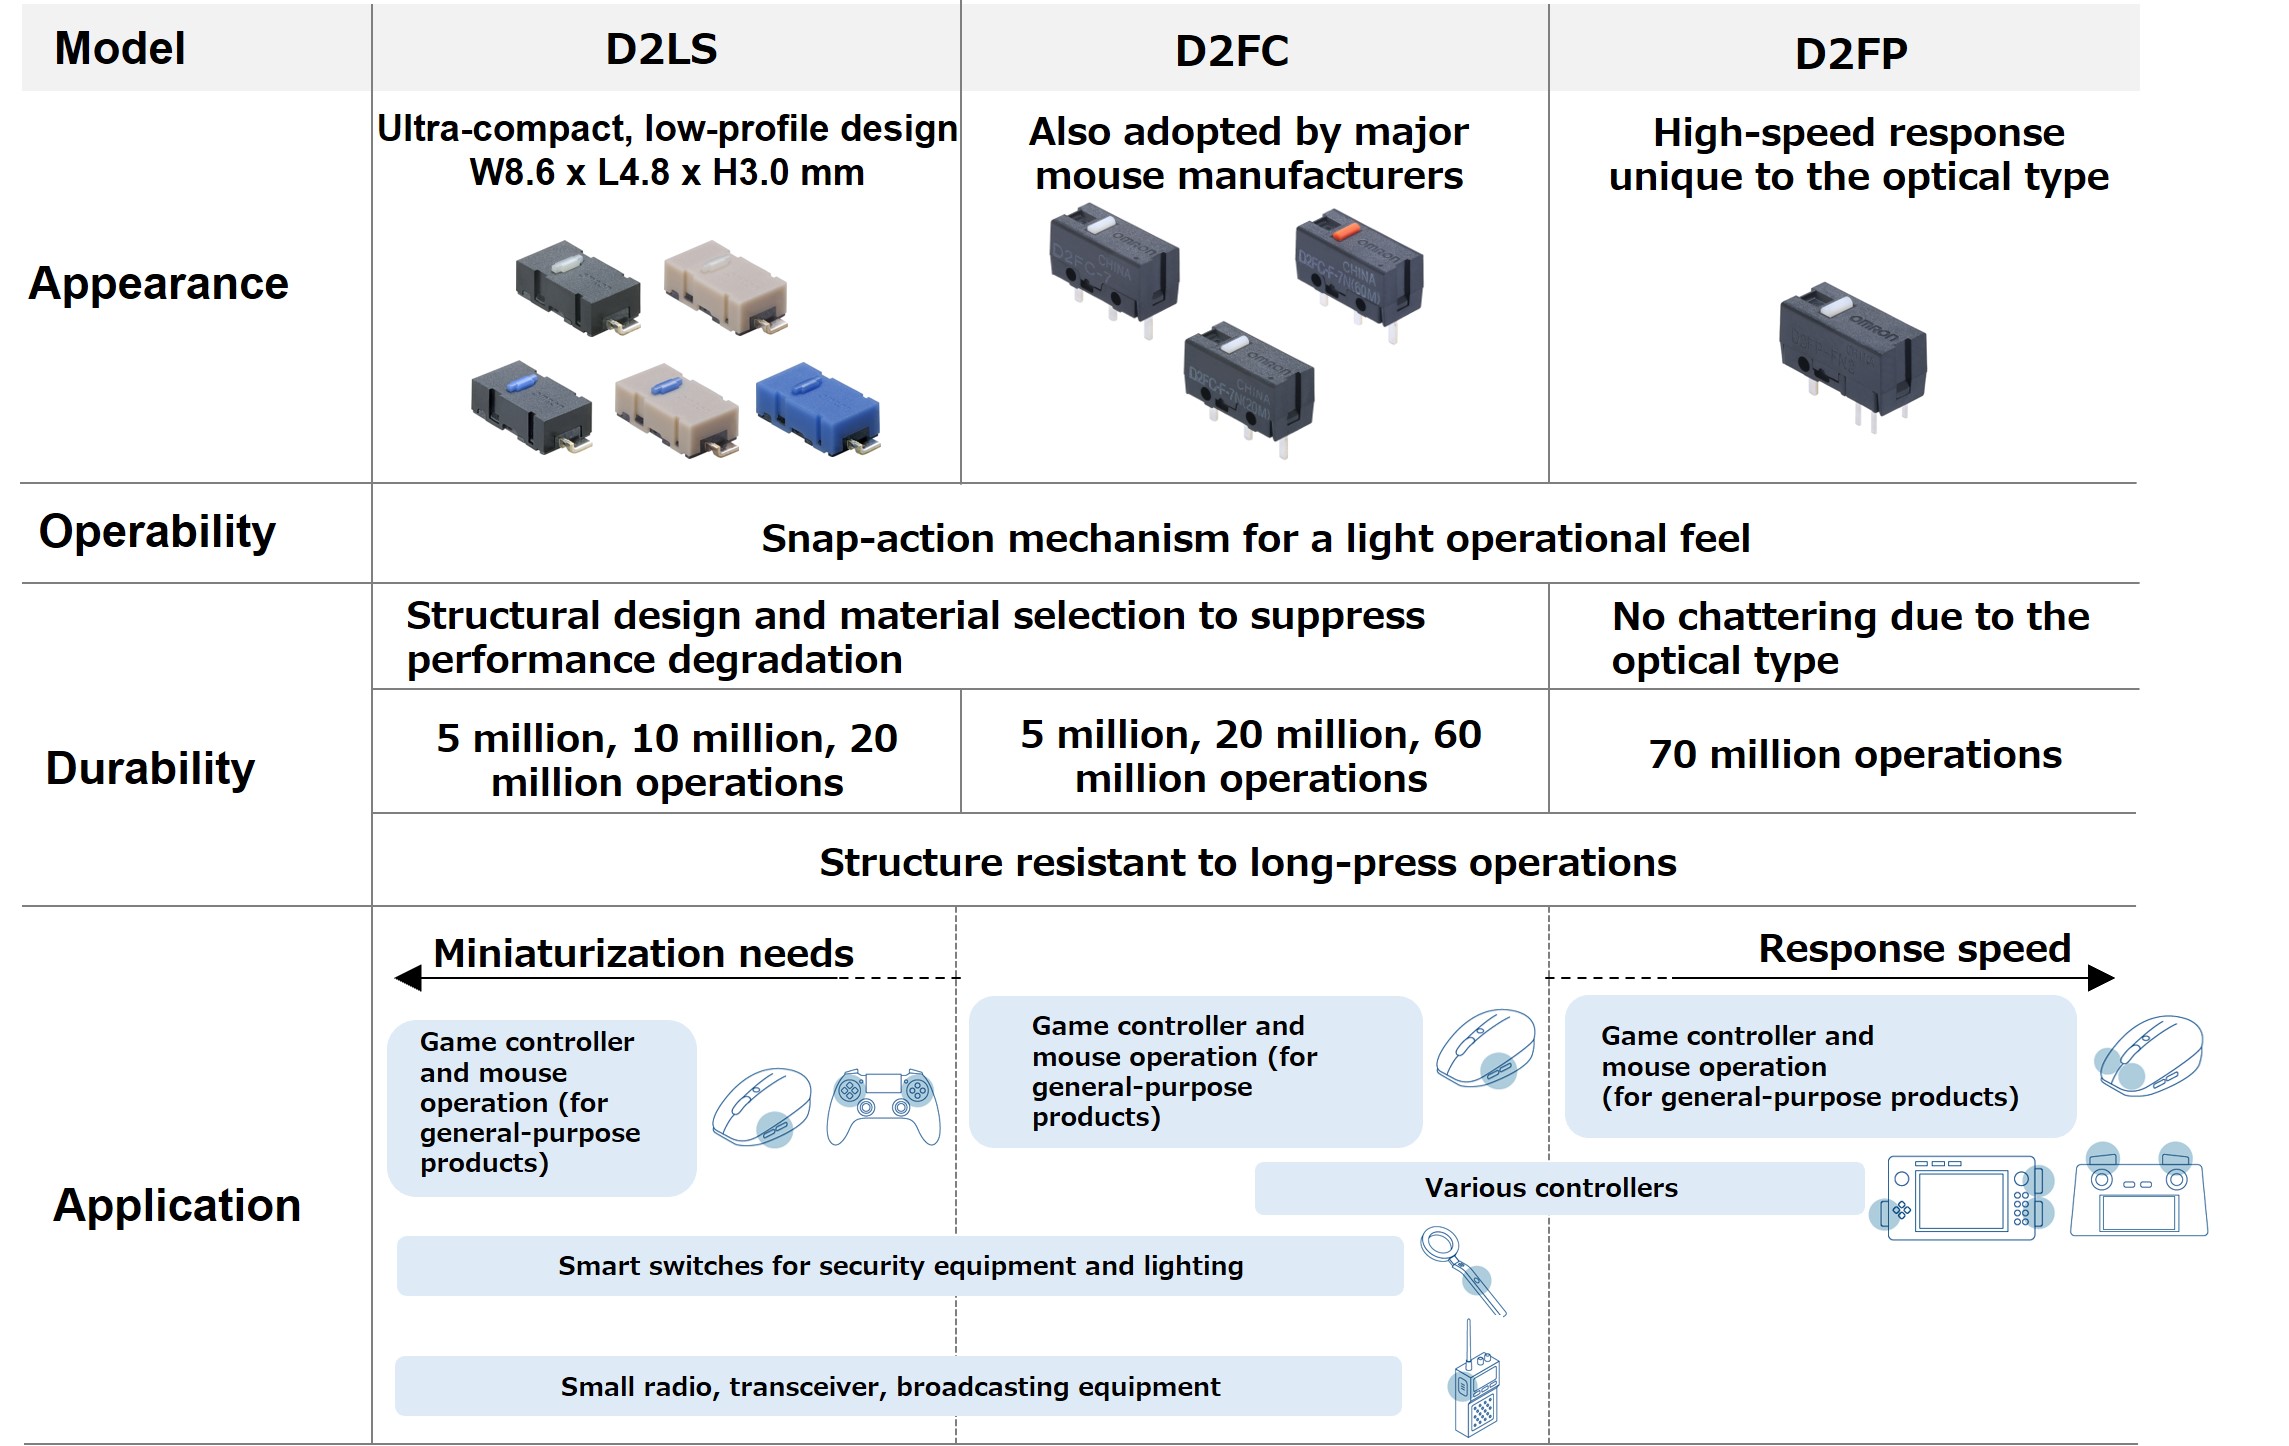 Main specifications and applications of D2FC, D2LS, and D2FP